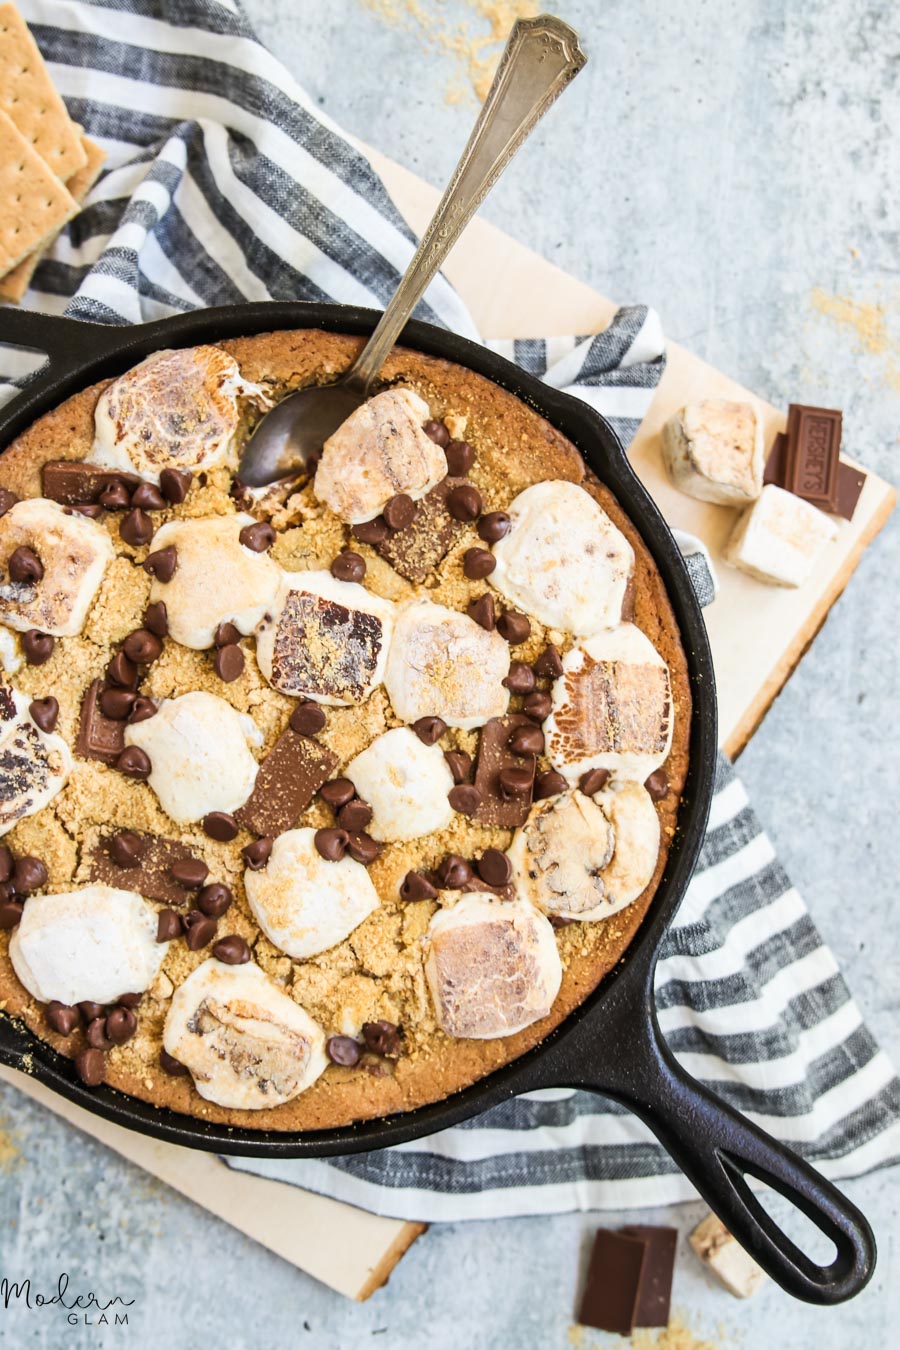 NC Custom: Lodge® and Fresh Beginnings Cookie Mix and Skillet